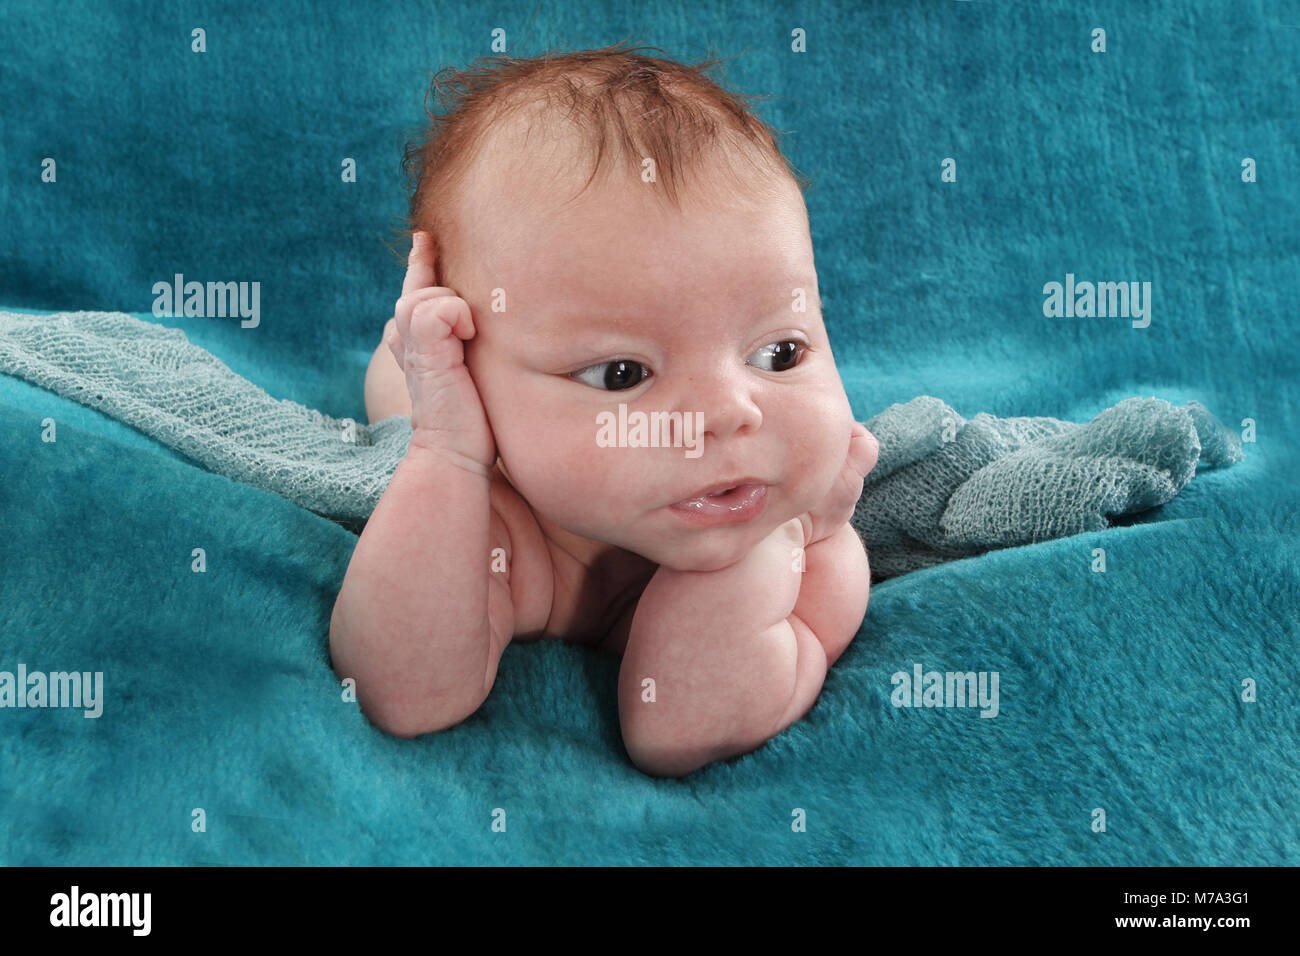 New Born Baby Boy relaxing in nursery Banque D'Images